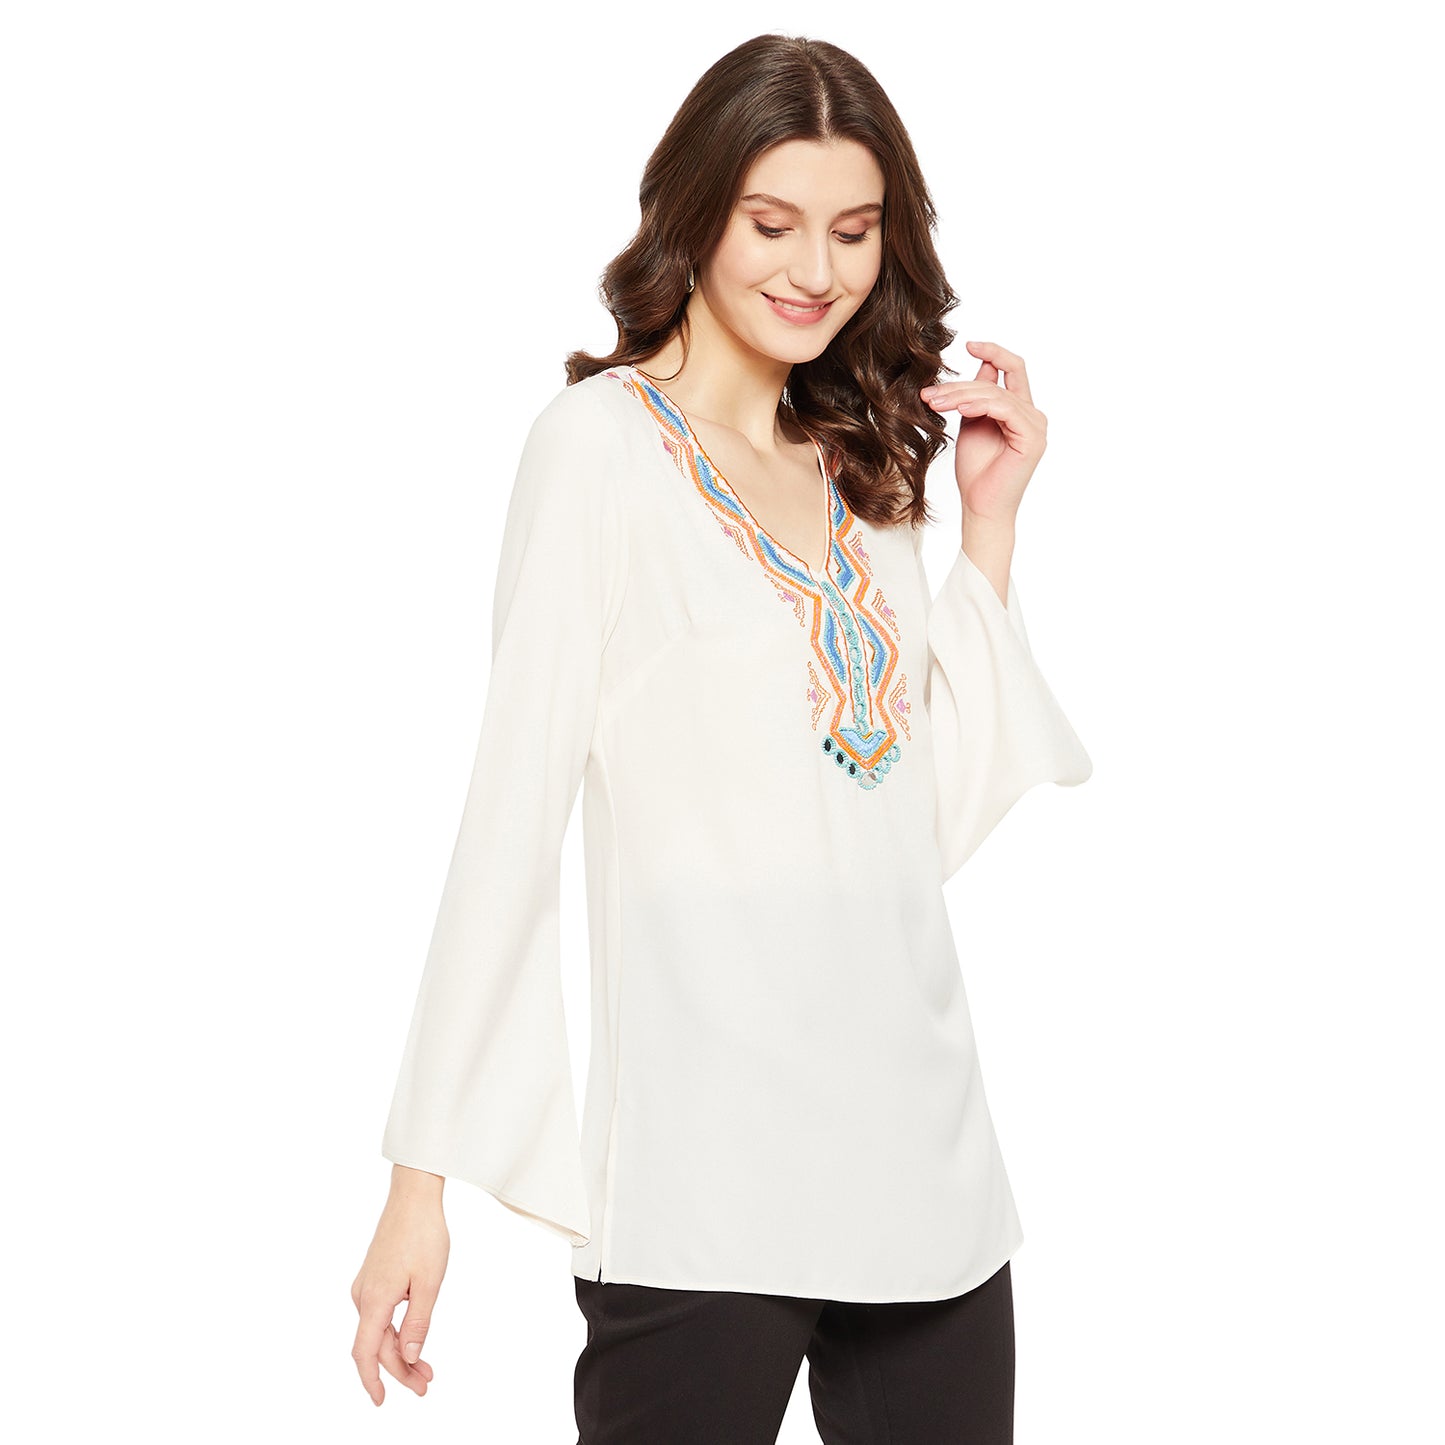 LY2 Elegant cream embellished party wear top.